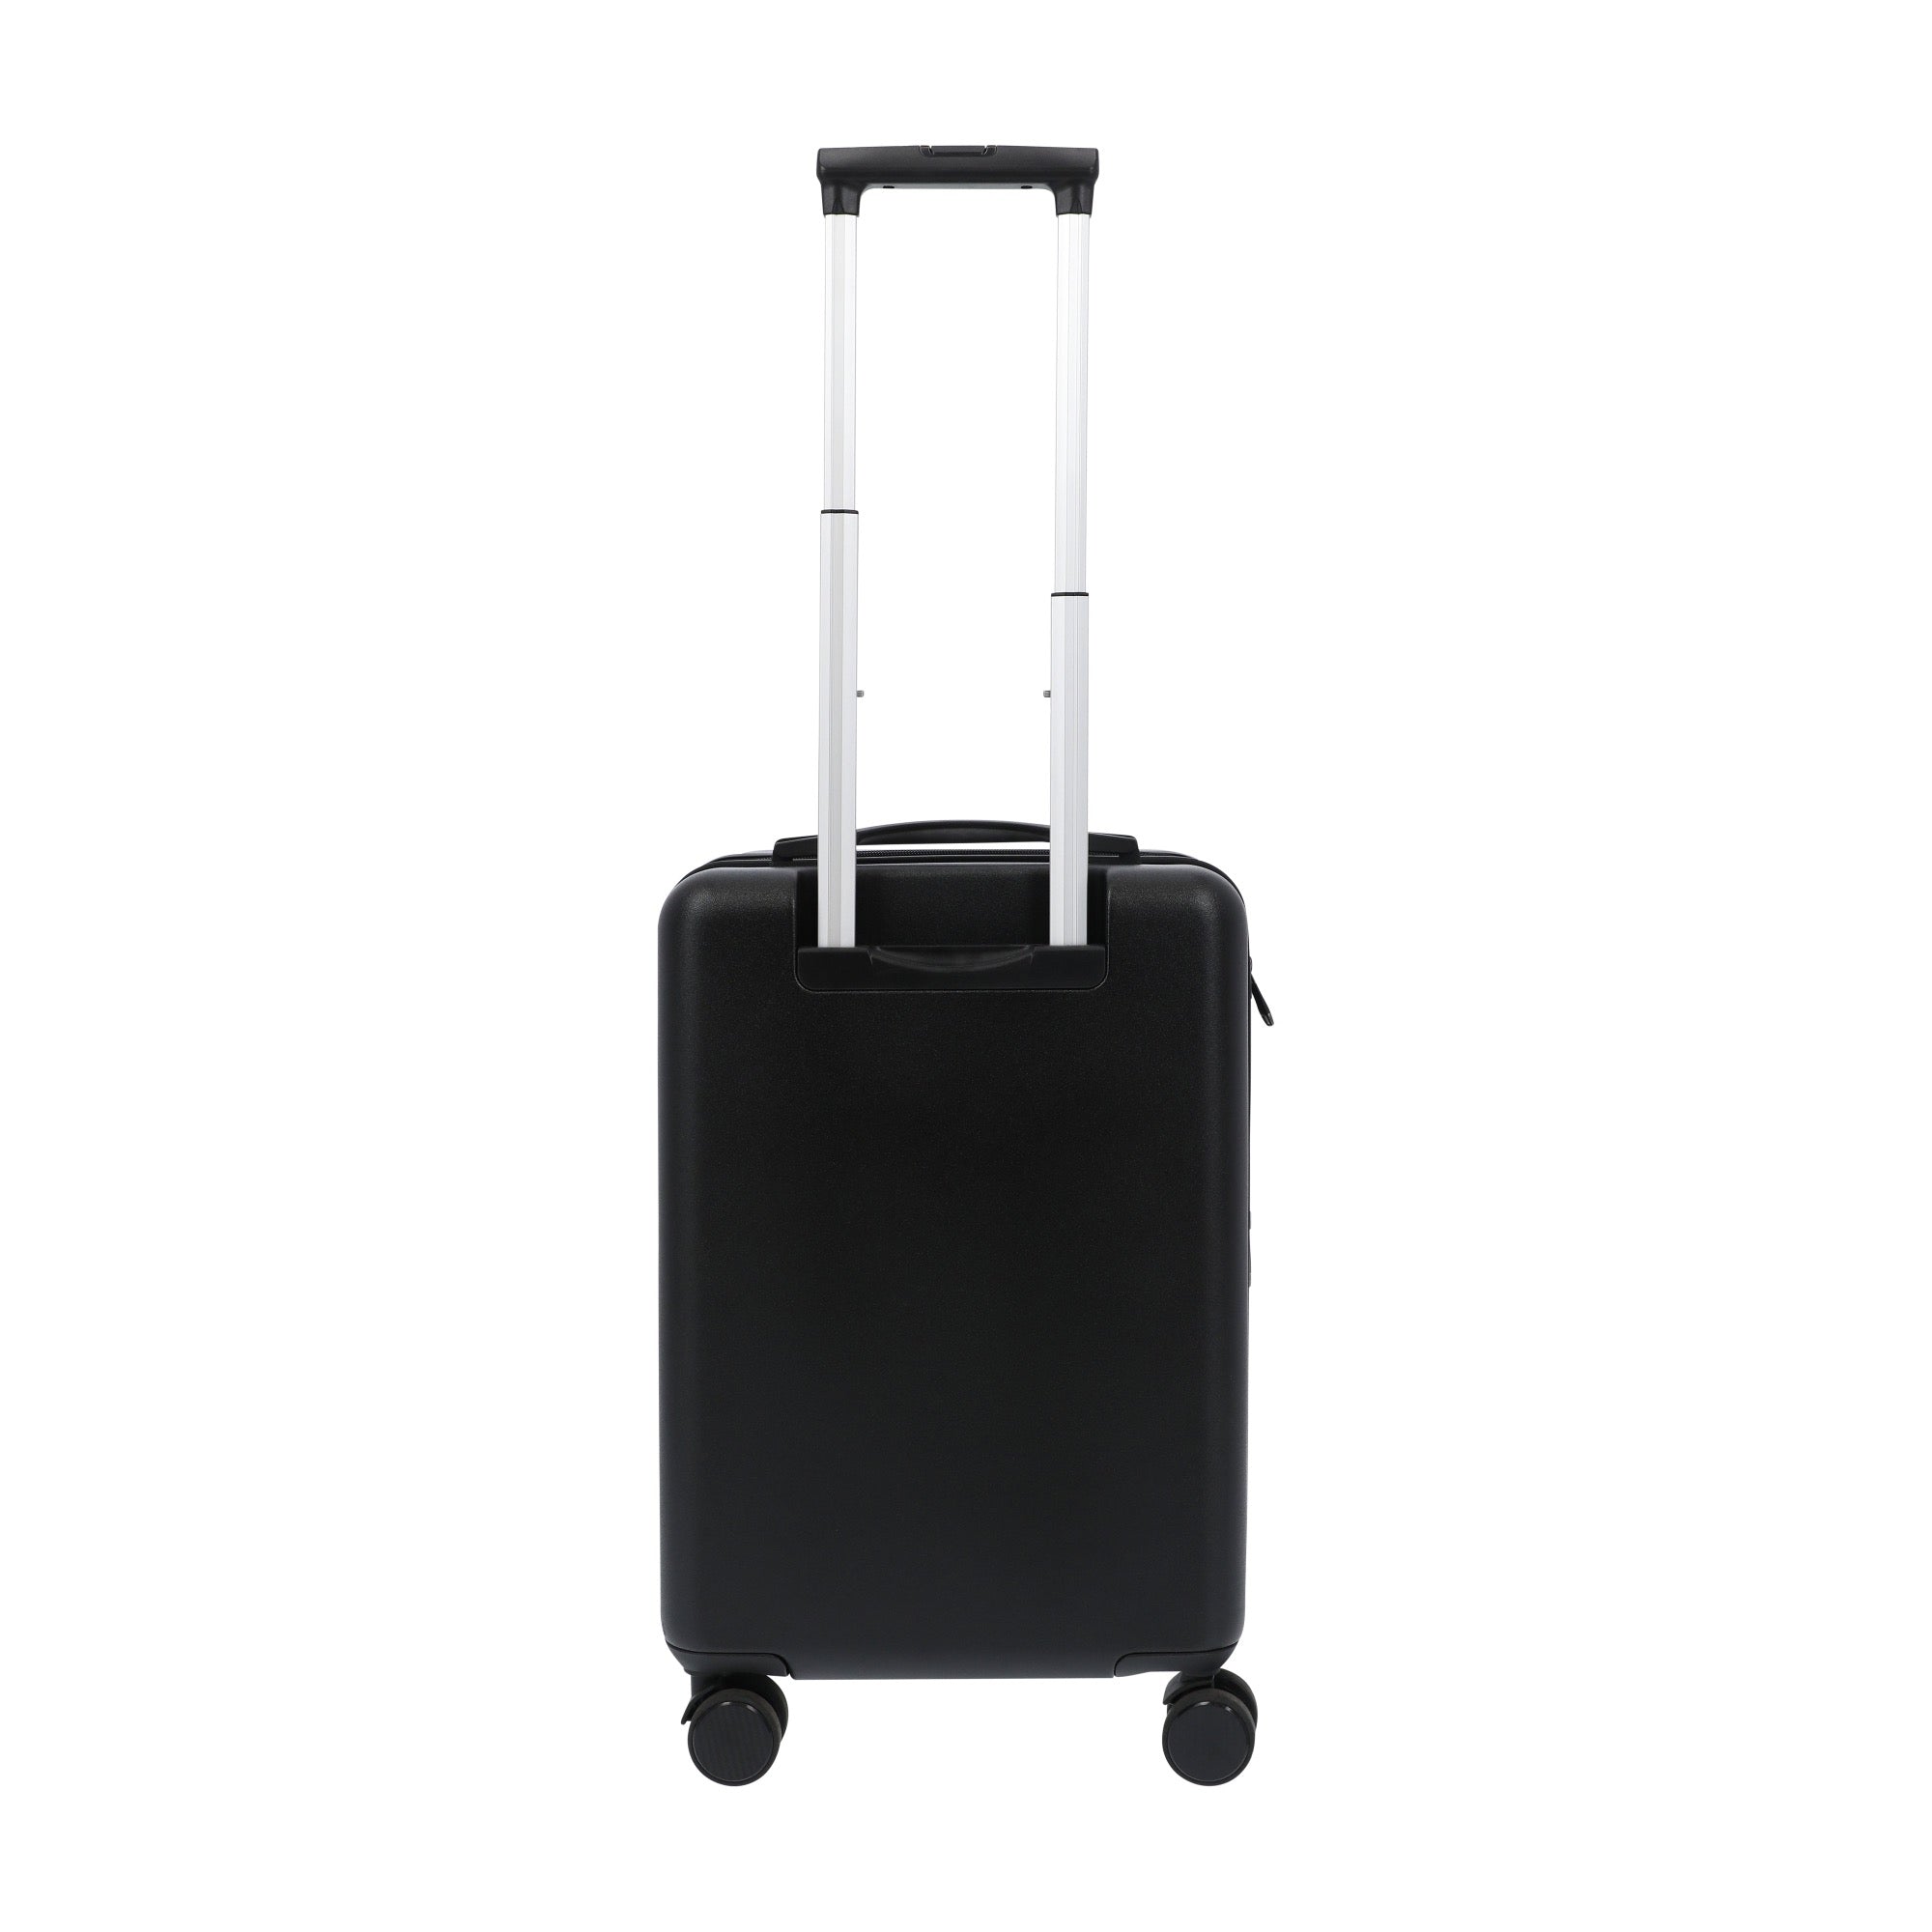 Black 22.5" carry-on spinner suitcase luggage by Ful